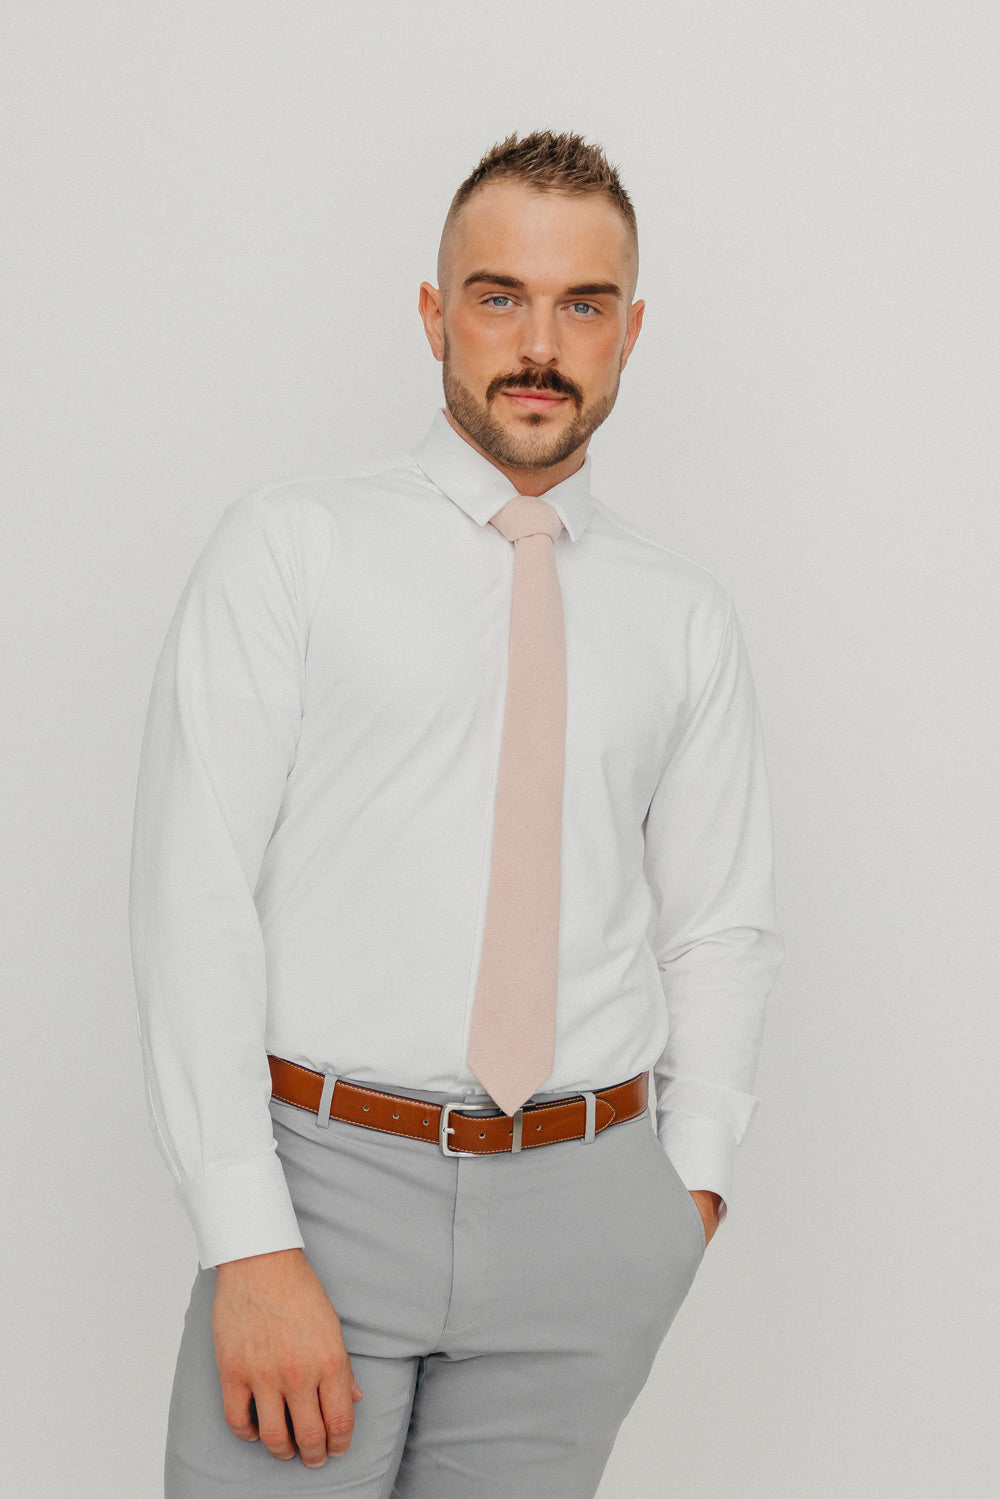 Mauve tie worn with a white shirt, brown belt and gray pants.